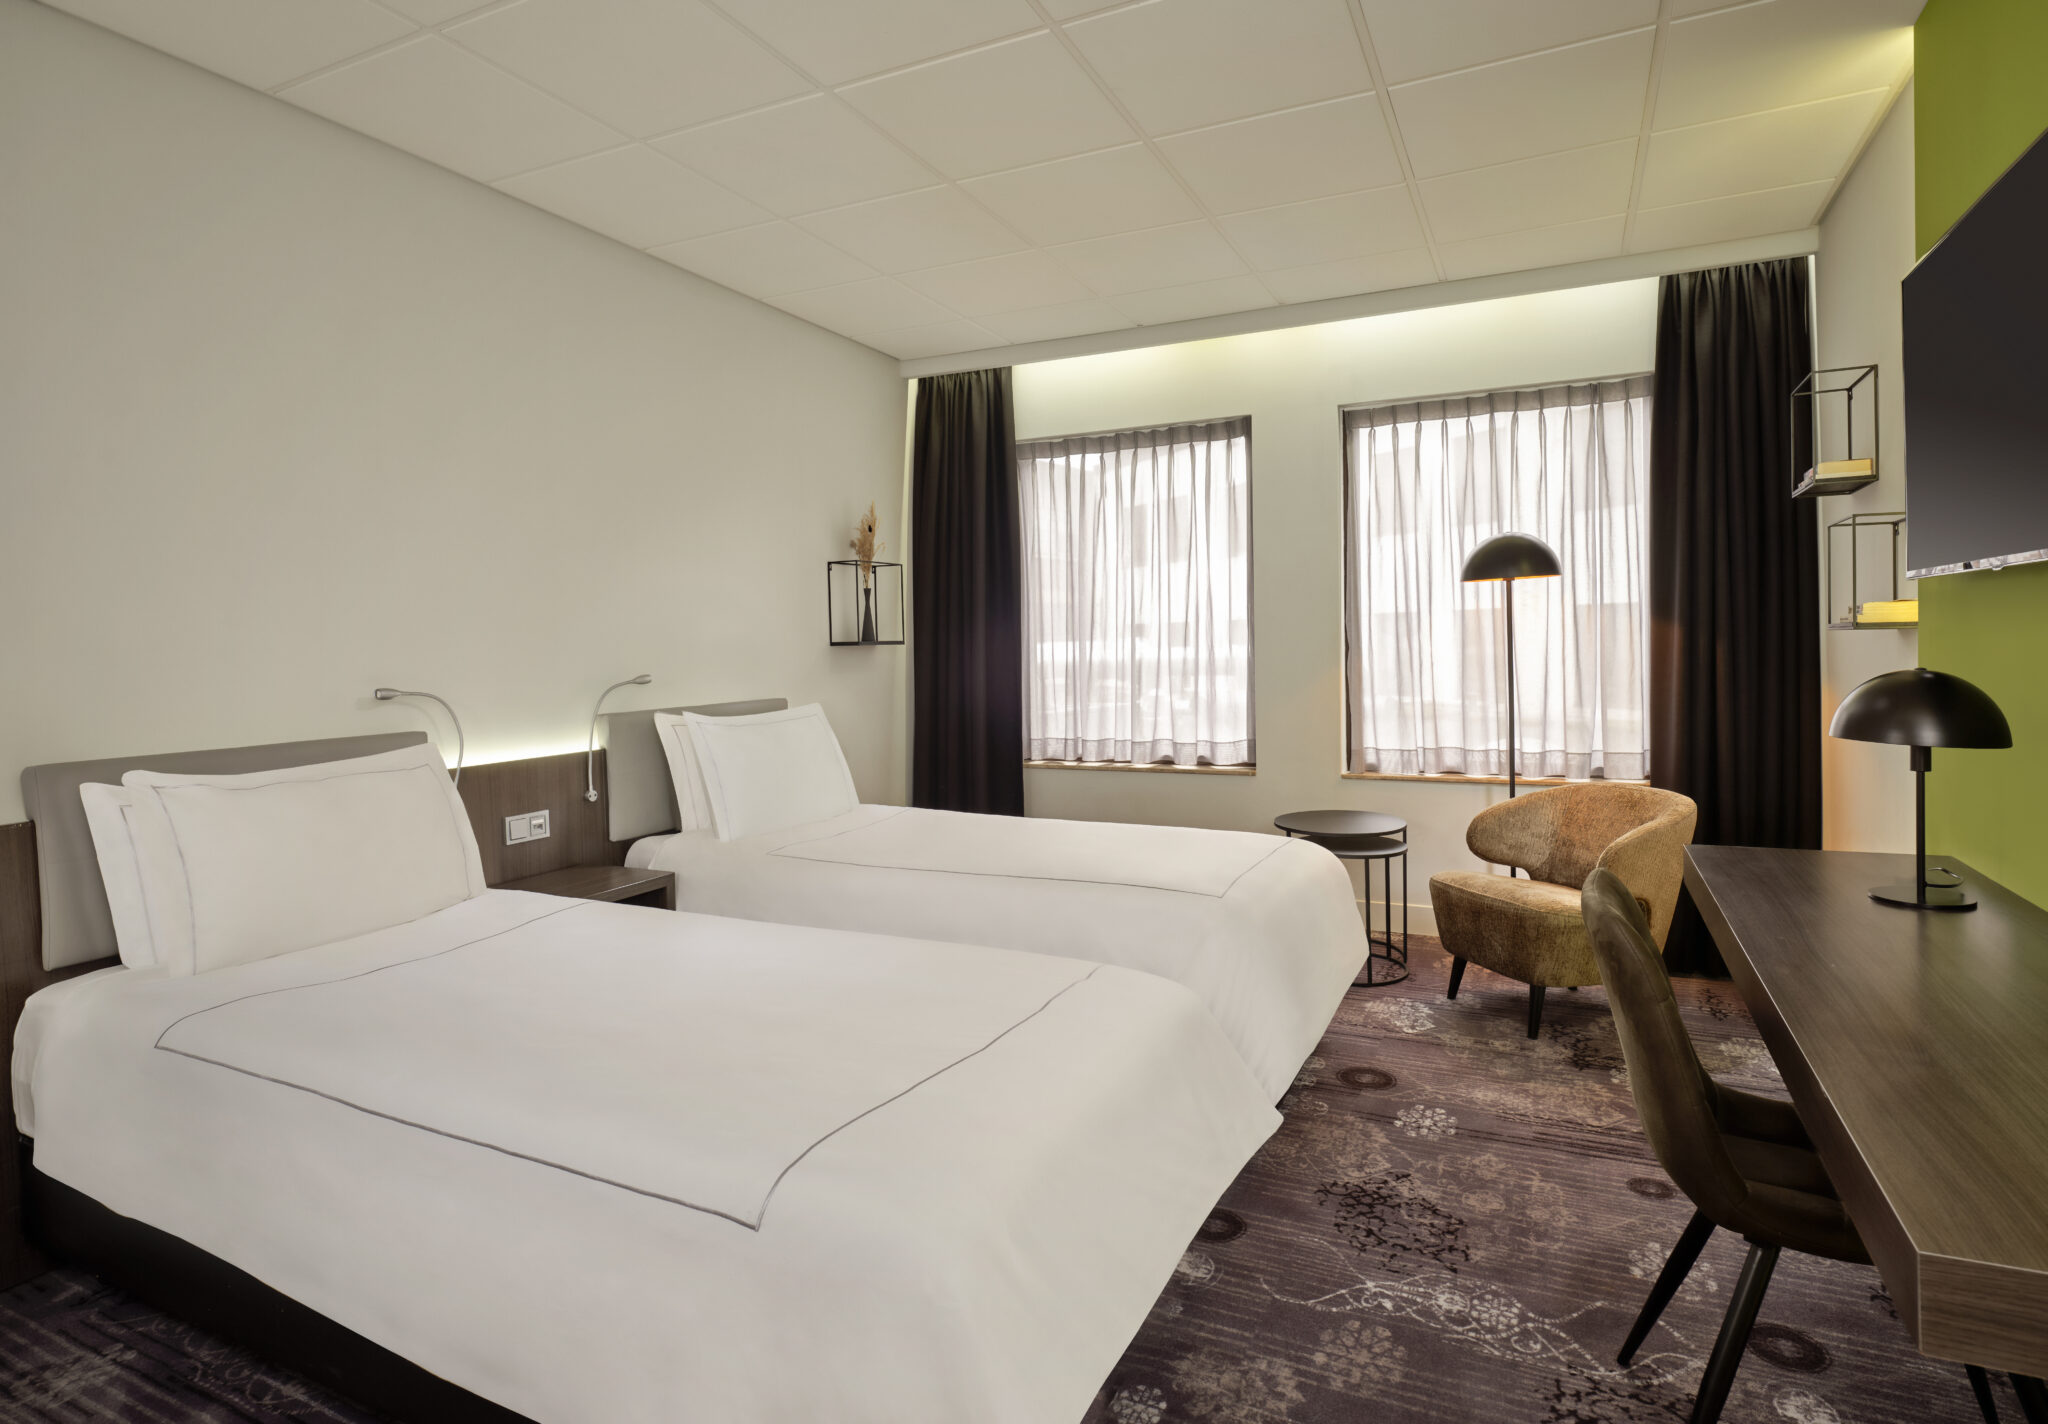 Park Plaza Eindhoven superior twin room with beds, window view, lounge chair, desk and TV